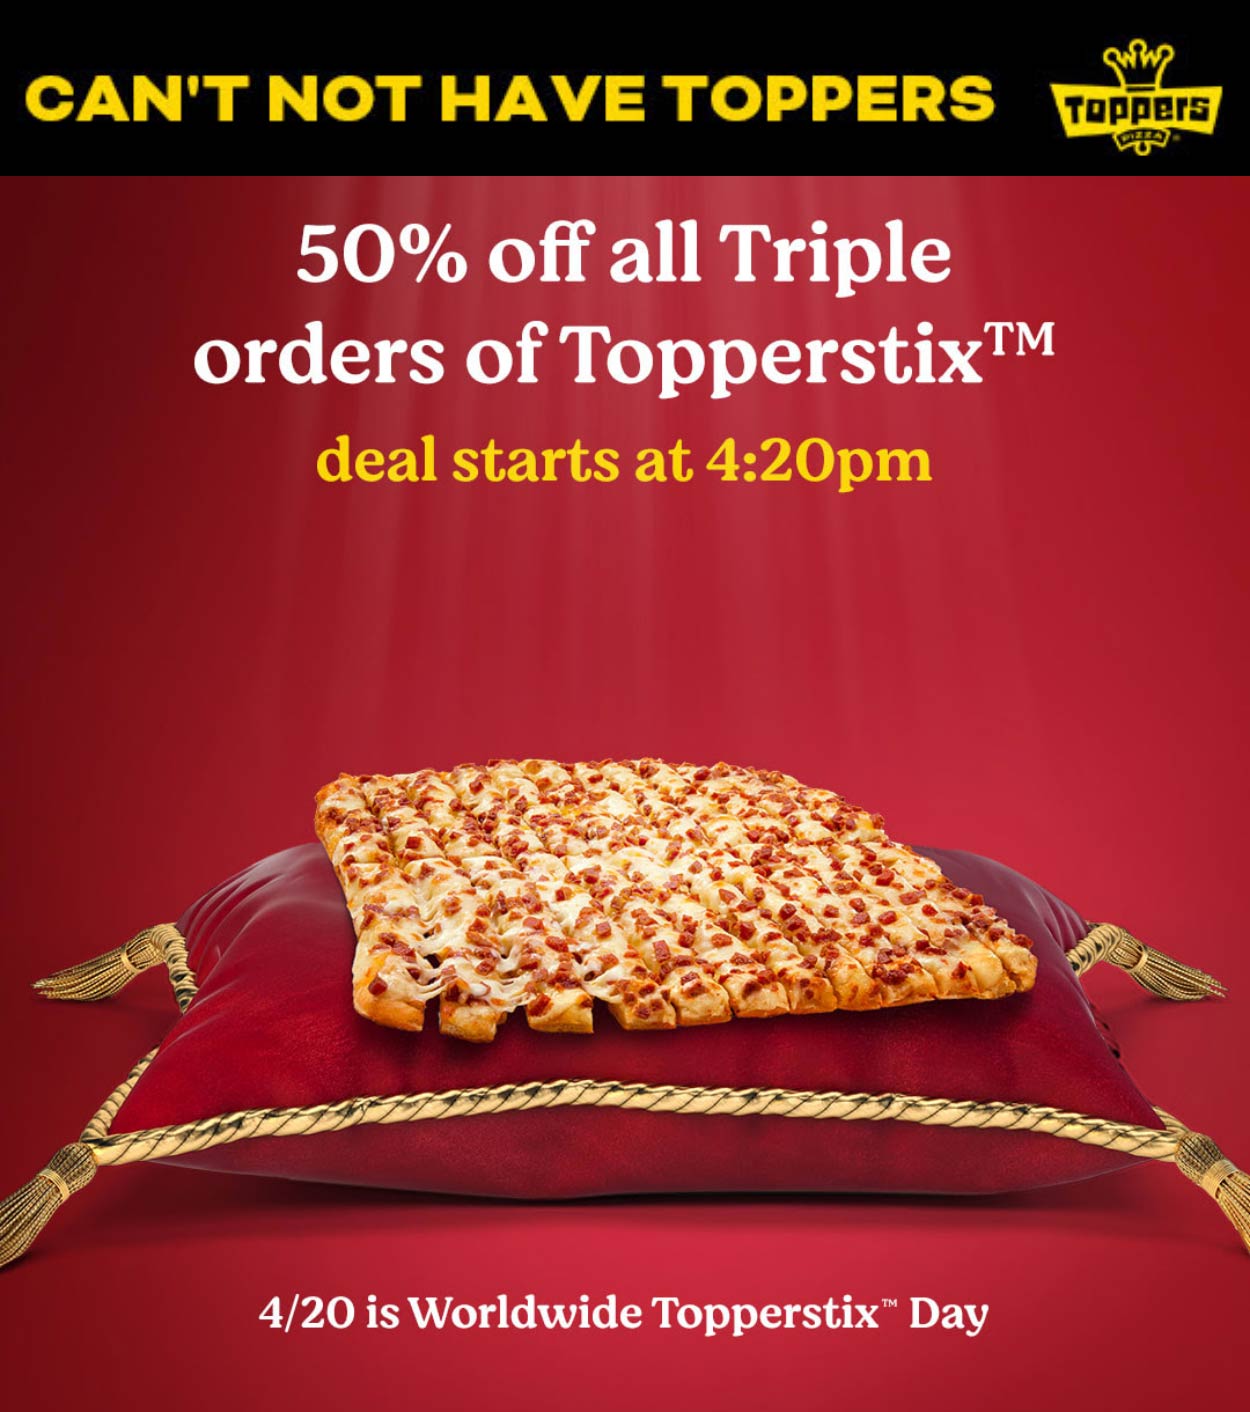 Toppers restaurants Coupon  50% off cheese garlic bread triple orders today after 4p at Toppers pizza #toppers 